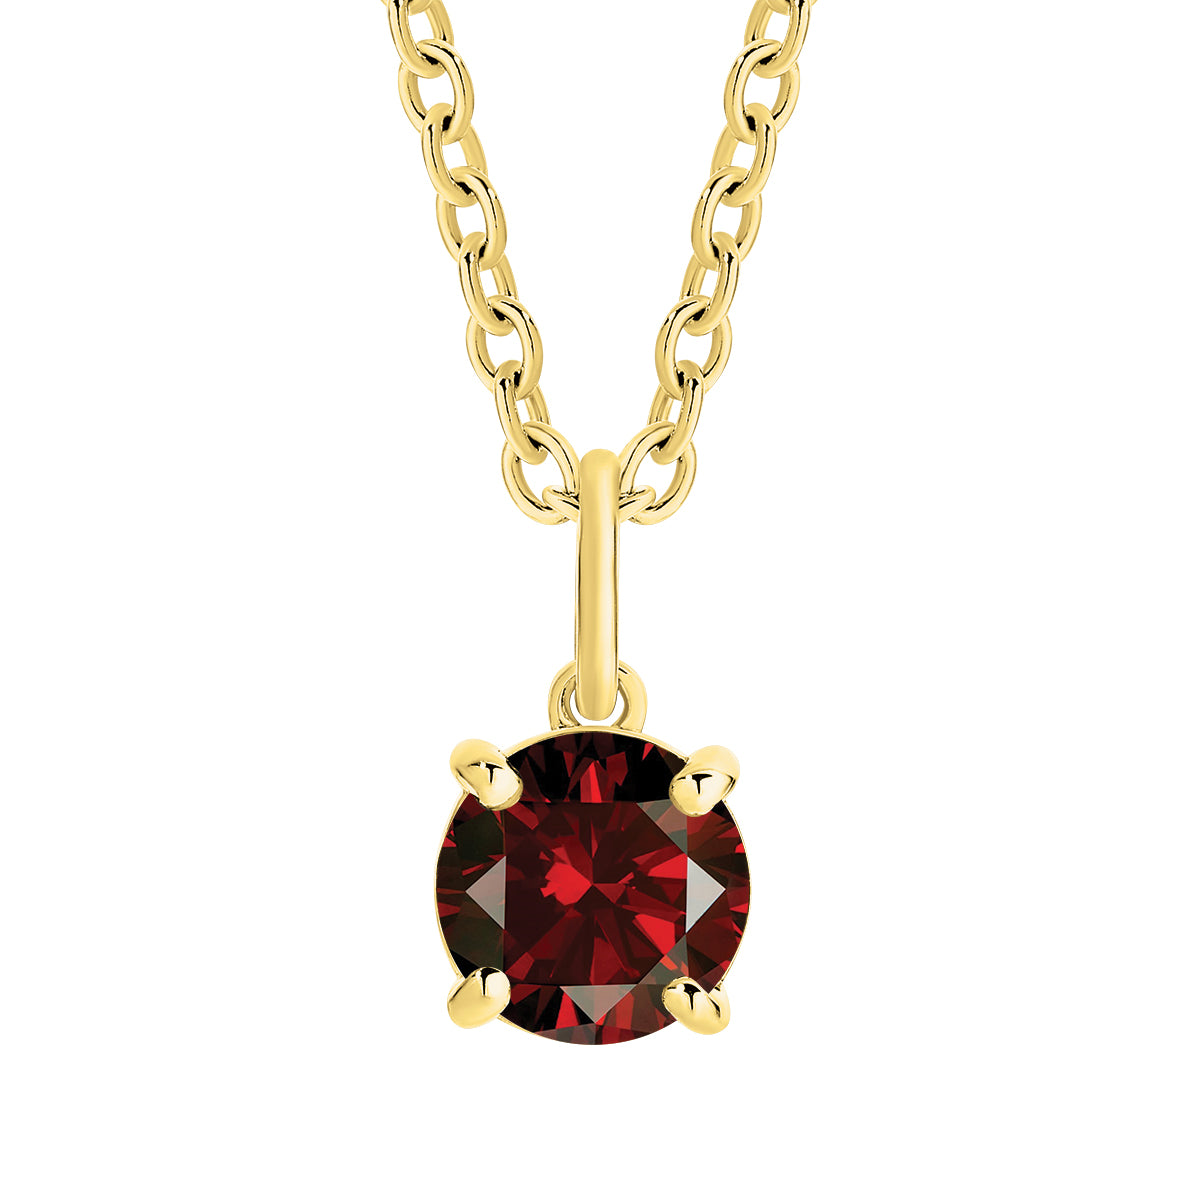 Natural 1.00ct round garnet pendnant in 9ct yellow gold